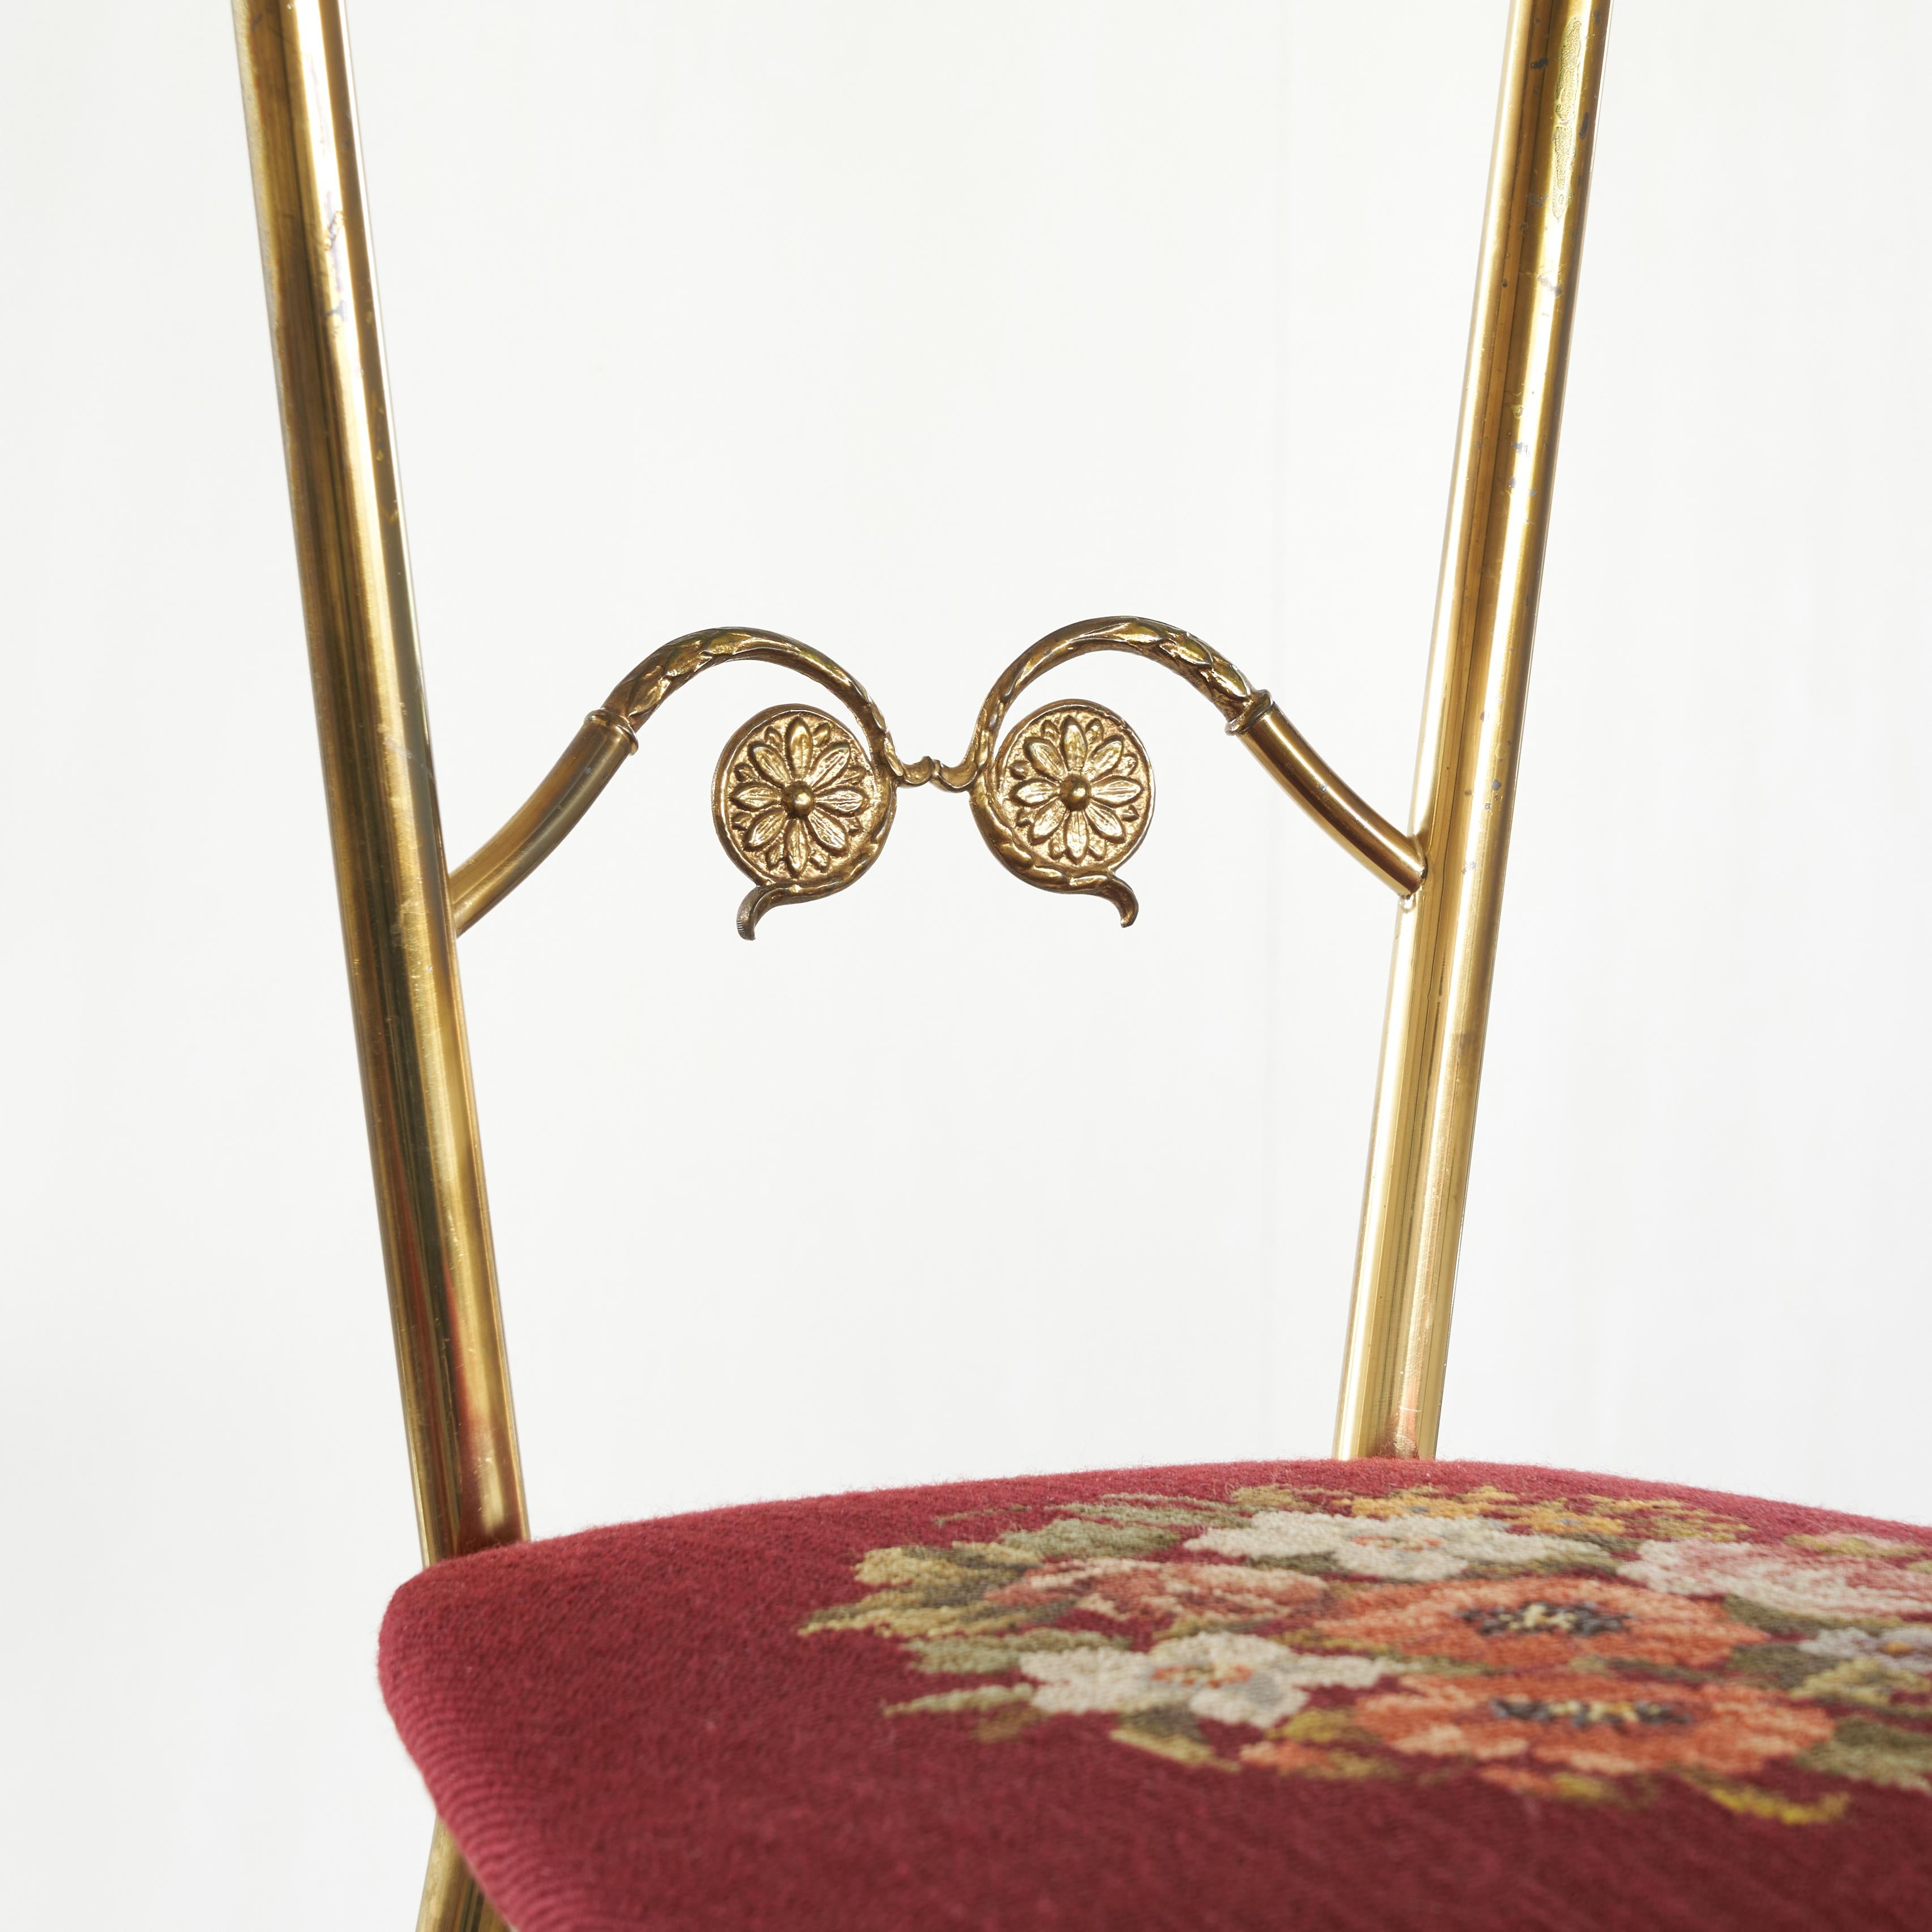 20th Century High Back Chiavari Chair in Brass and Embroidery, 1960s For Sale